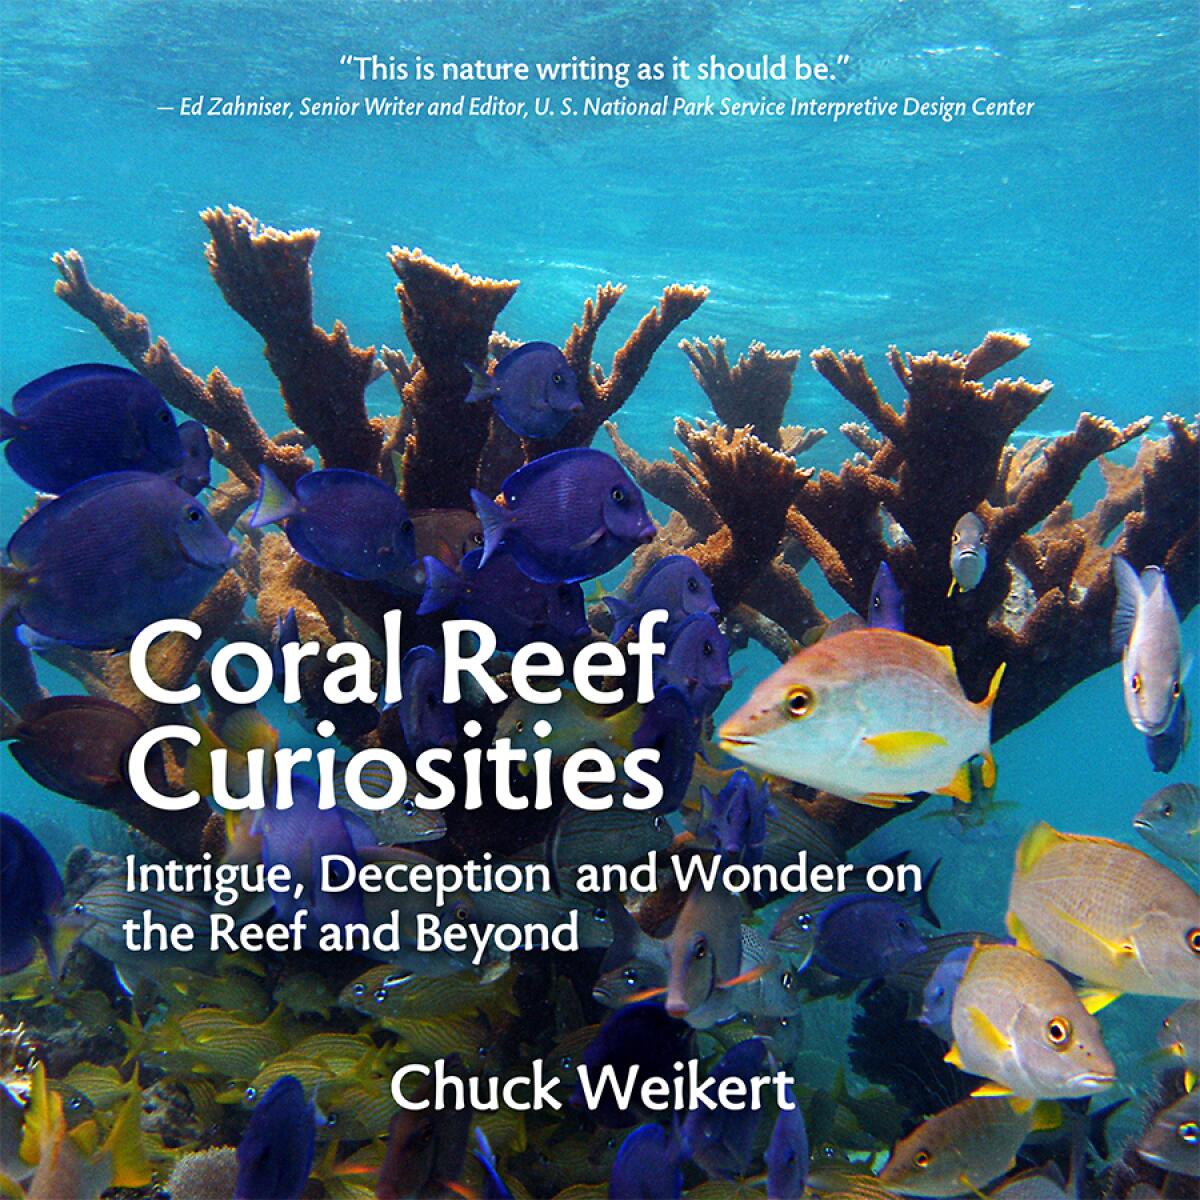 Coral Reef Curiosities book cover